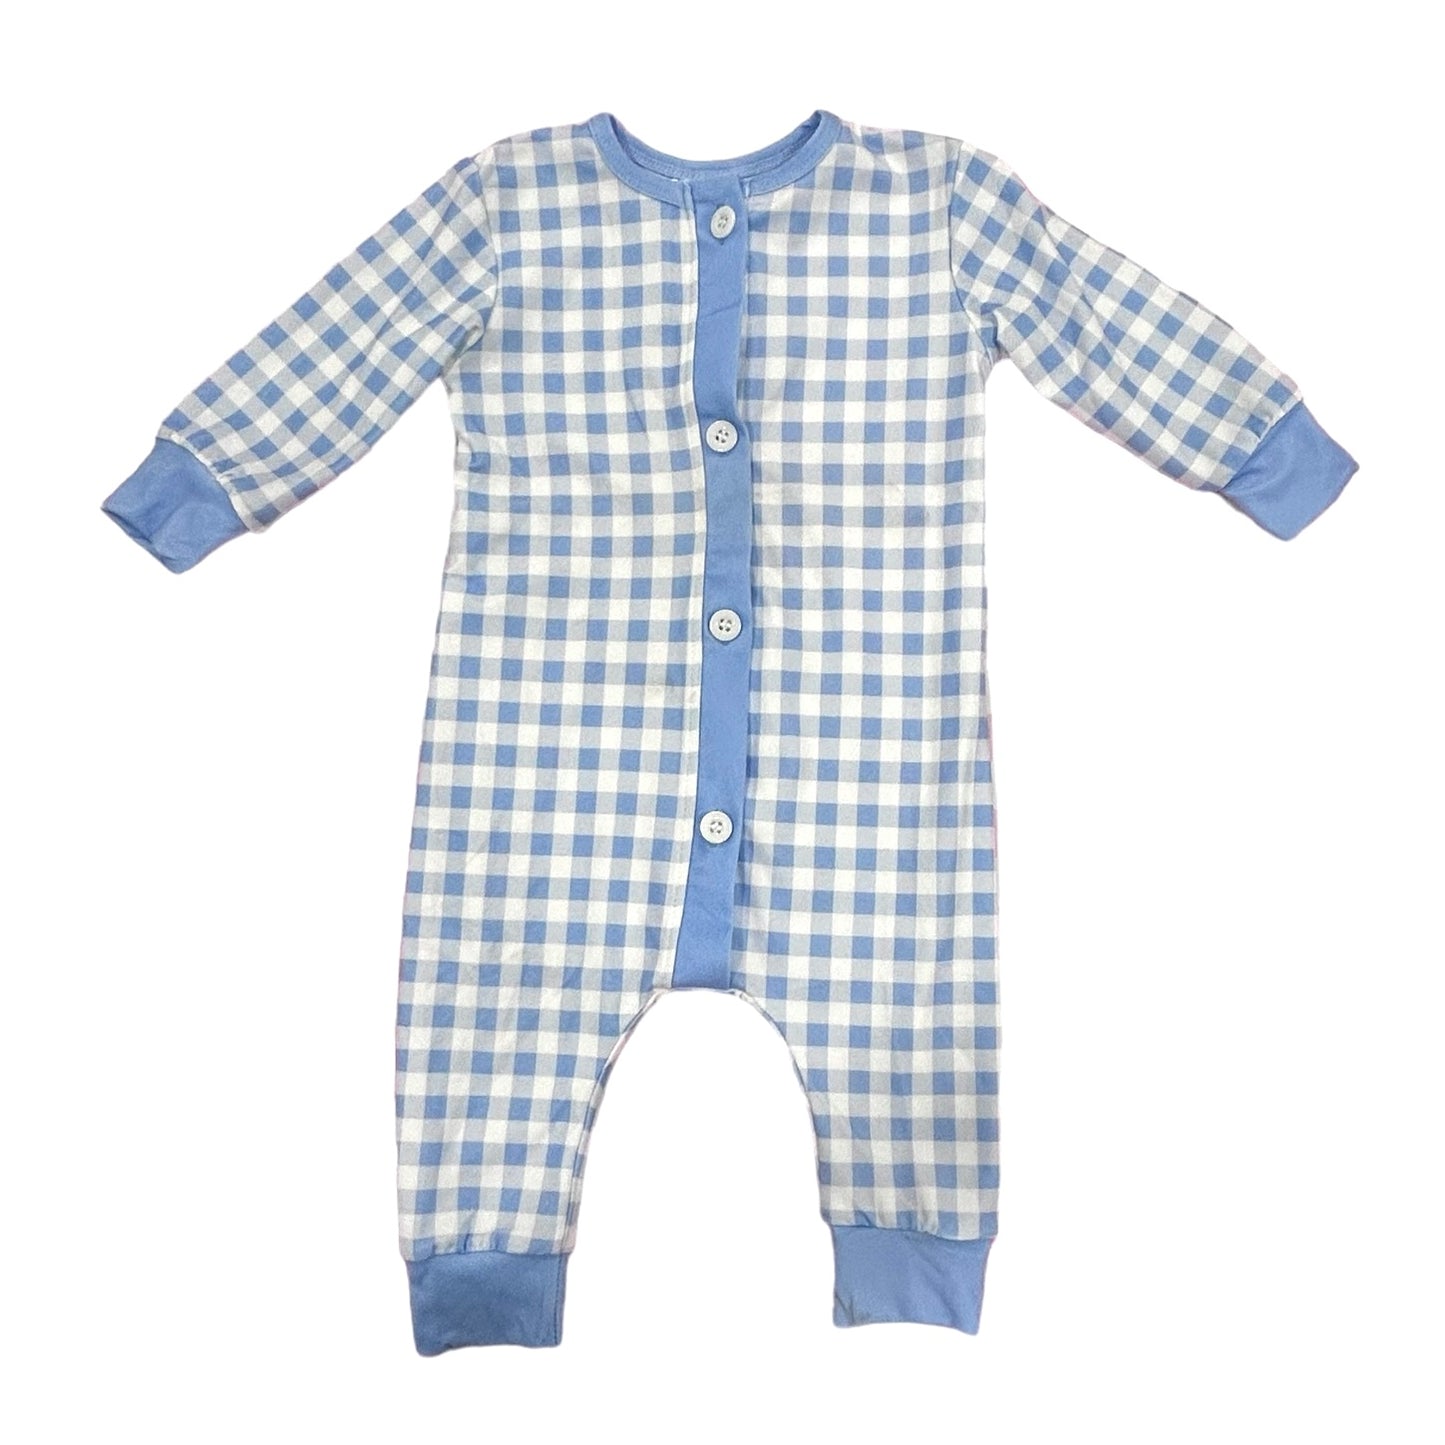 Buttflap Pajamas - Blue Trimmed Gingham